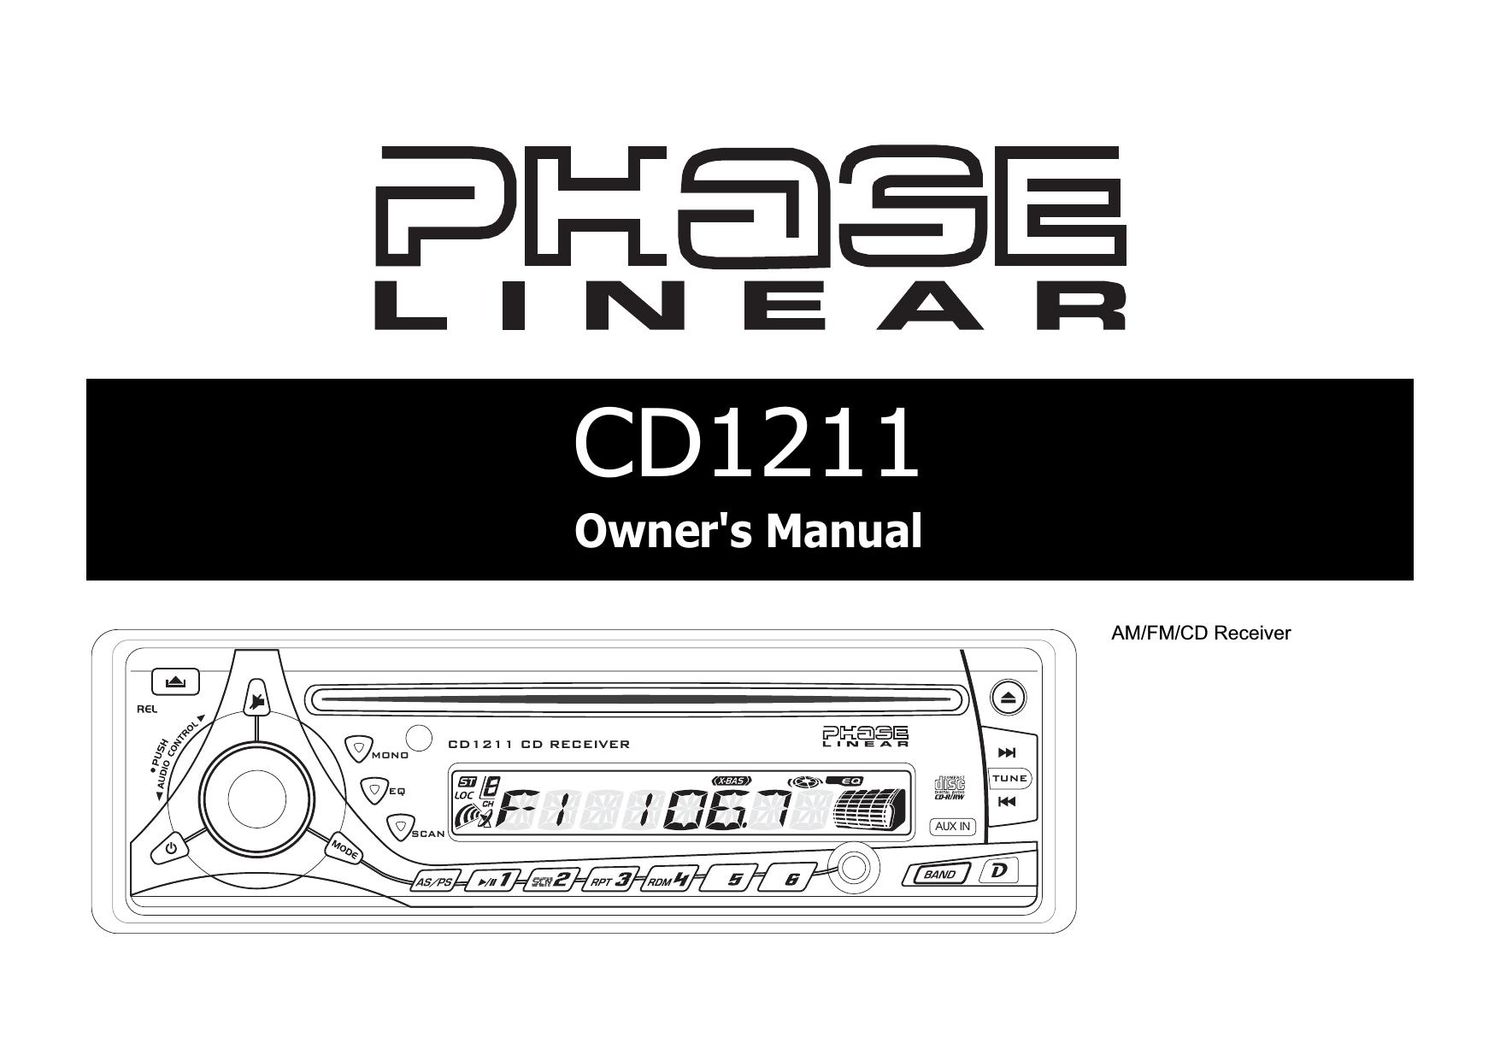 Phase Linear CD 1211 Owners Manual